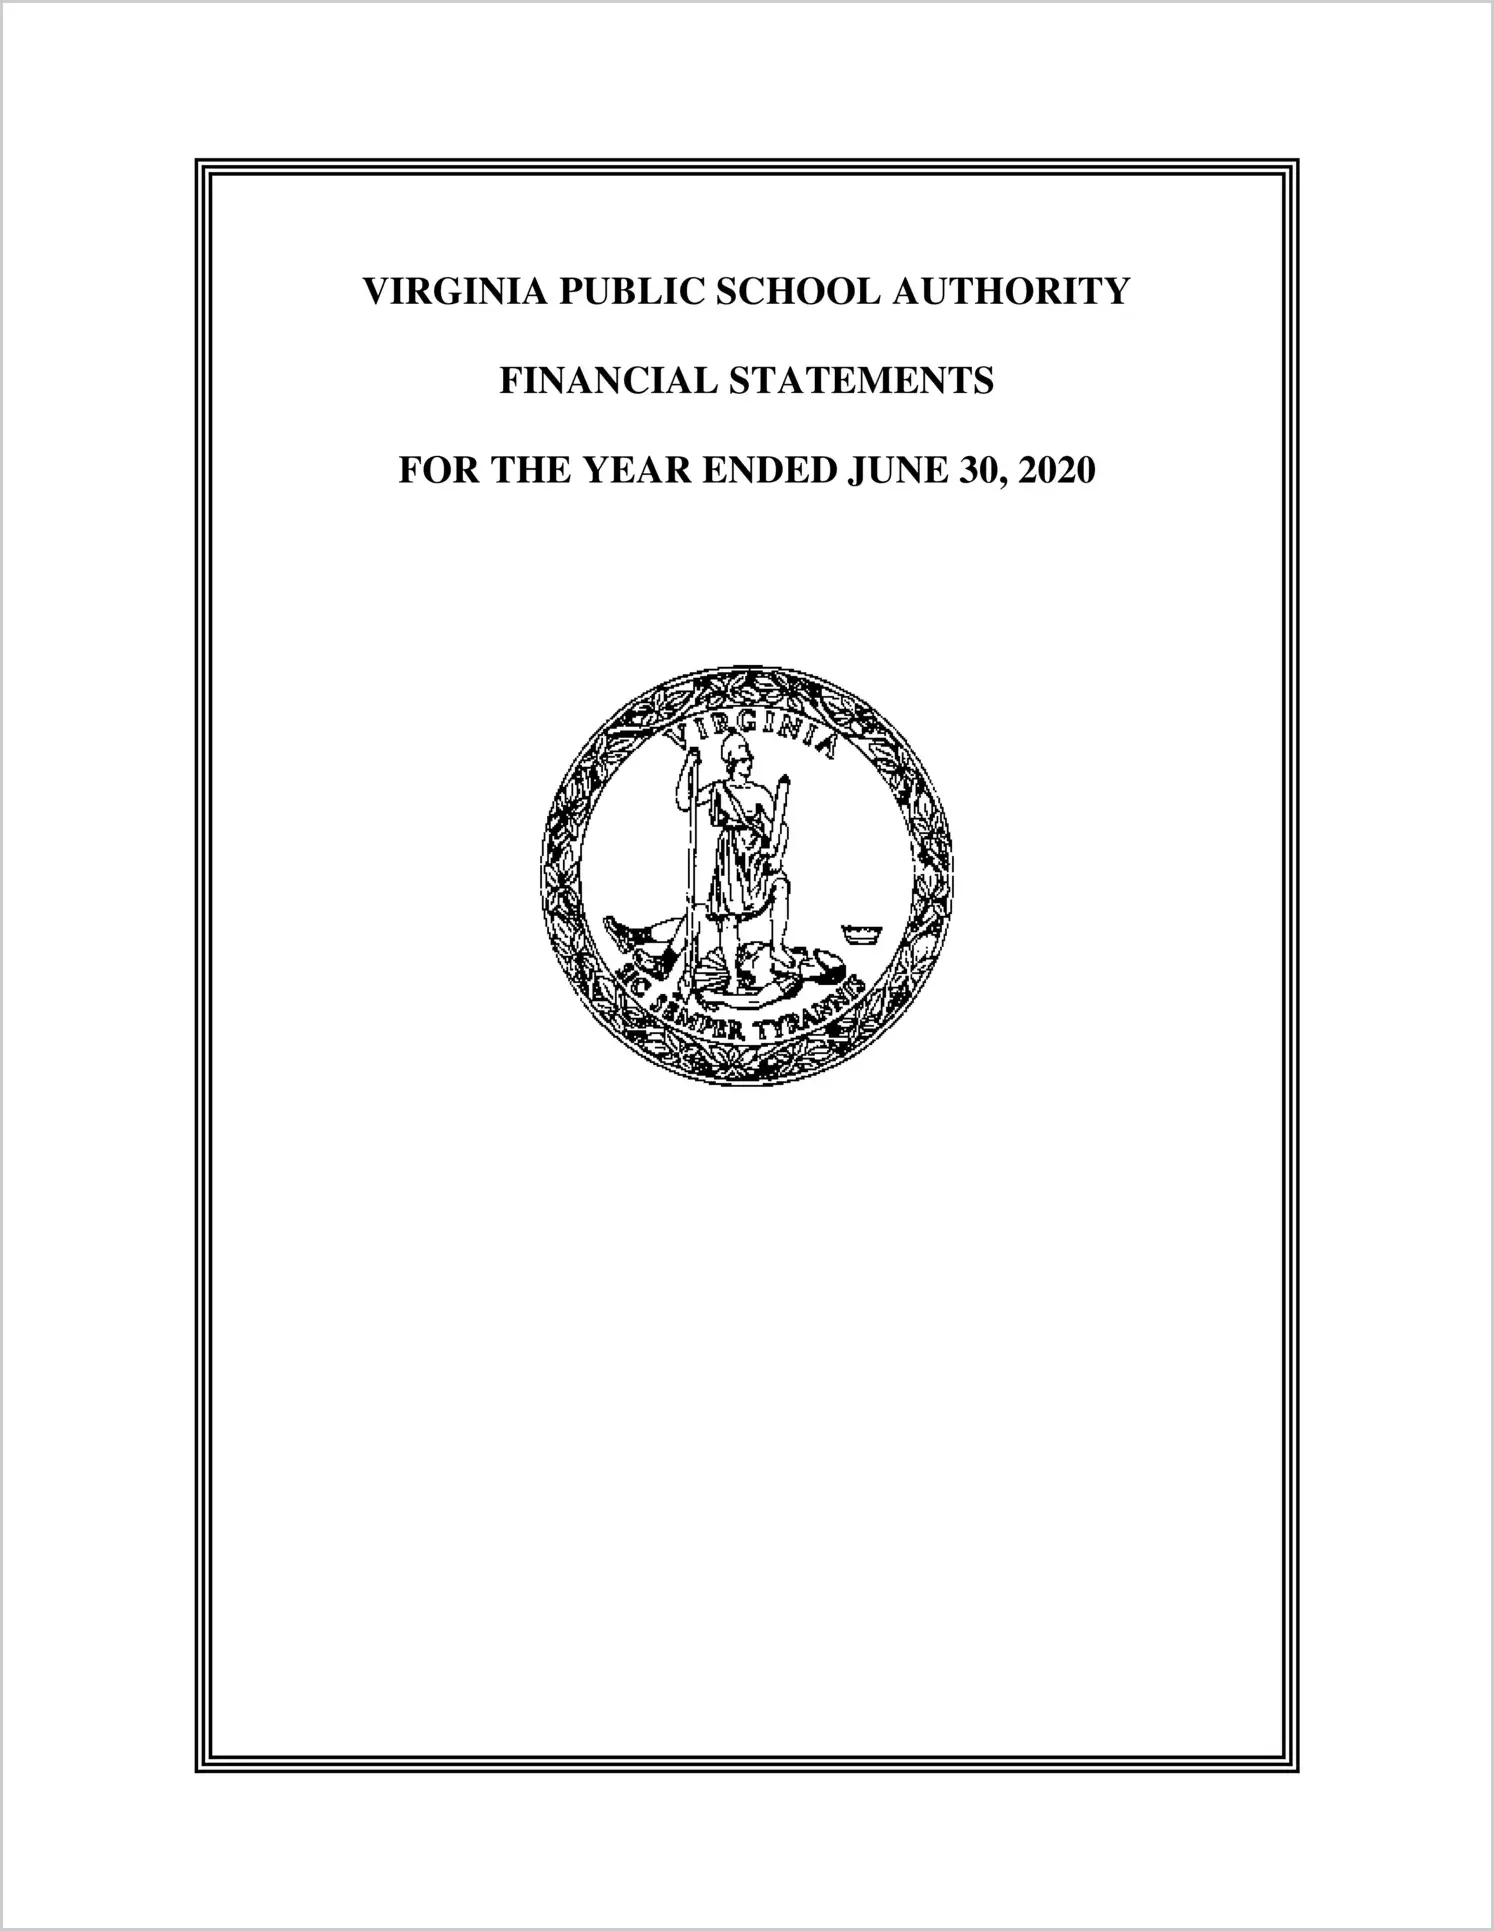 Virginia Public School Authority Financial Statements for the year ended 2020